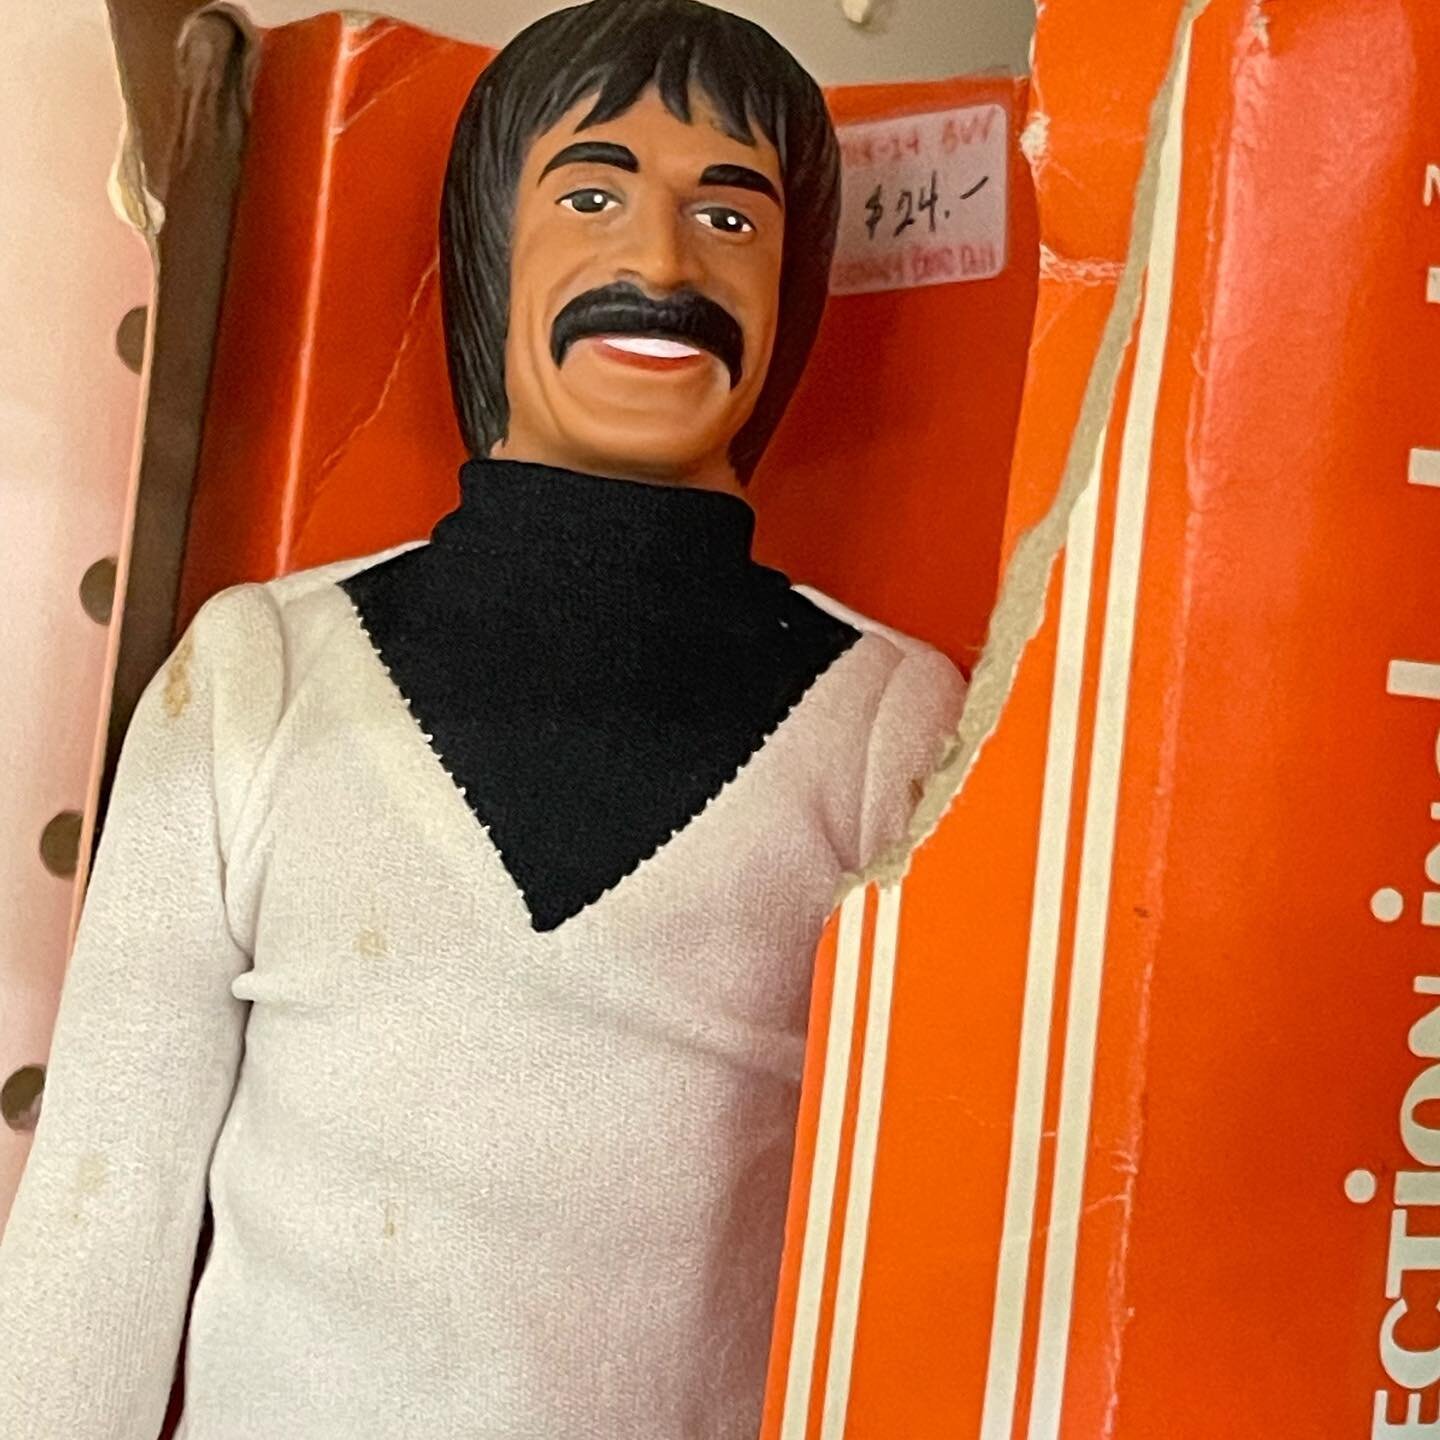 Weekend antique store photo dump 💥🤘

#retro #love #antiques #shopping #beauty #old #vintageisbetter #instagood #style #traditional #starwars #cannonballrun2 #vhs #diecastcars #sonnyandcher